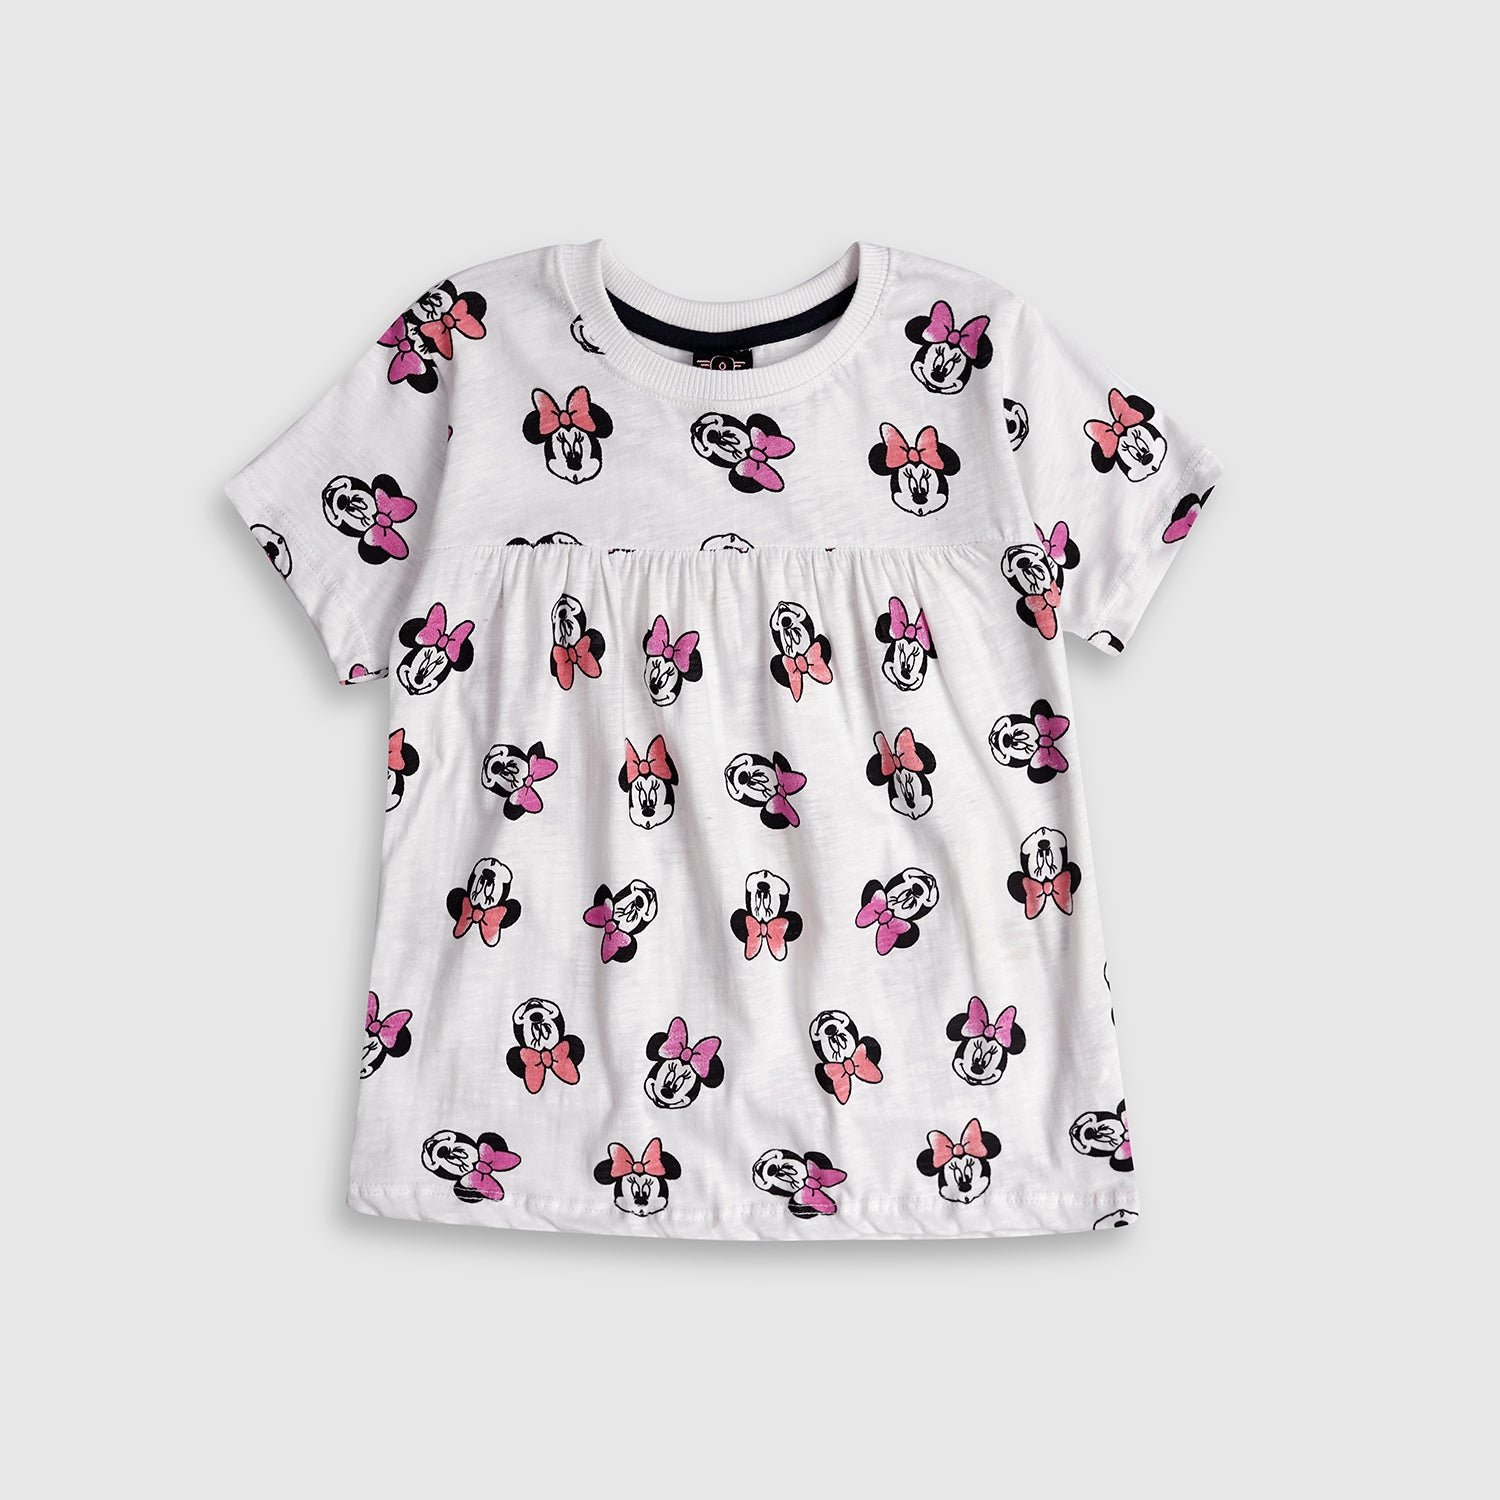 Girls All-Over "Mickey Mouse" Printed Soft Cotton Frock